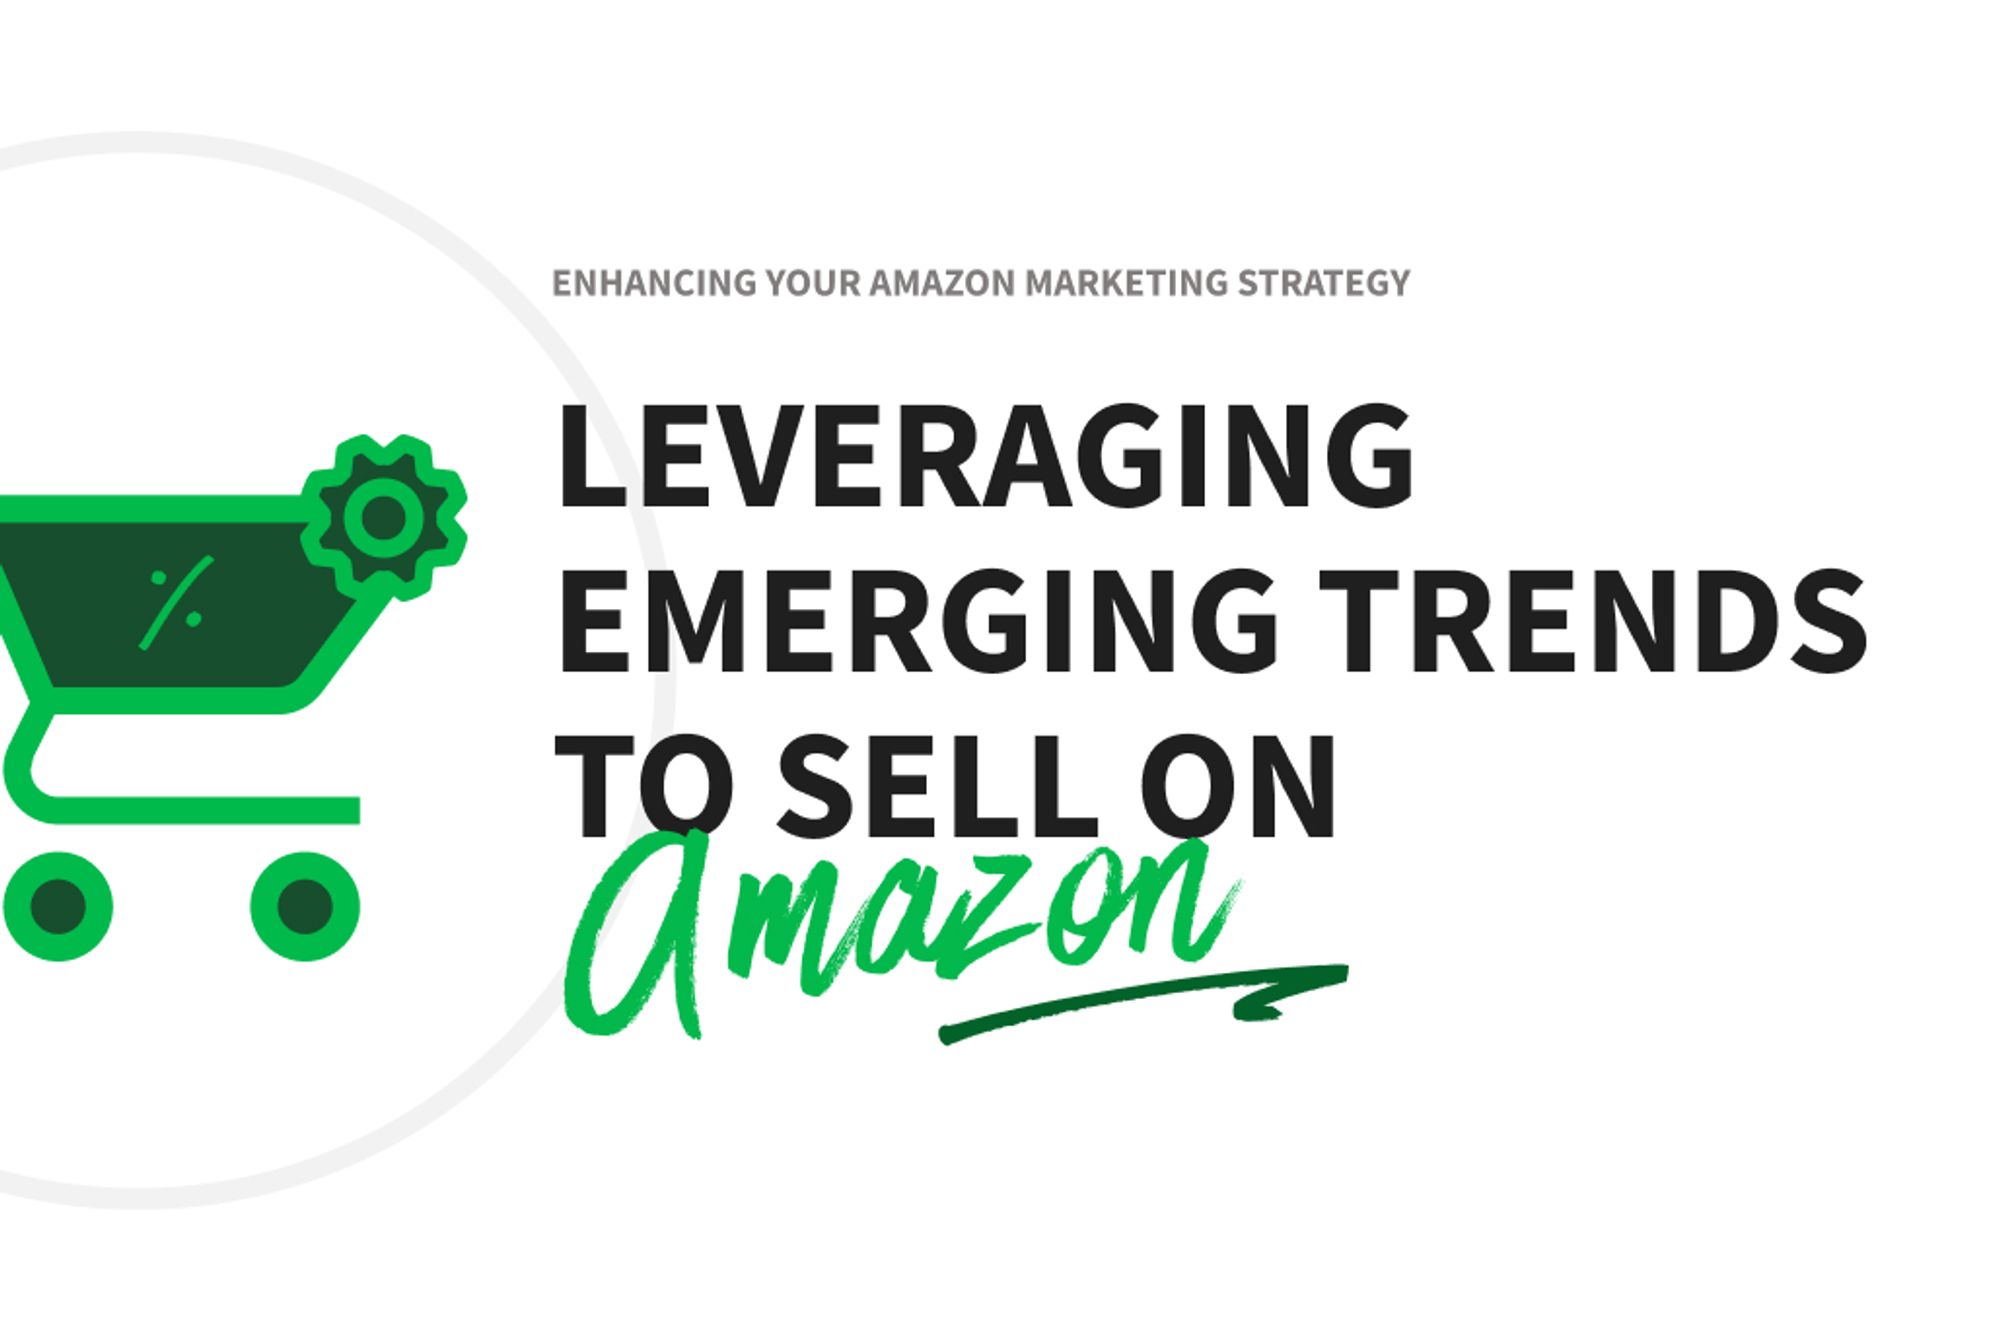 Leveraging Emerging Trends to Sell on Amazon: Enhancing Your Amazon Marketing Strategy